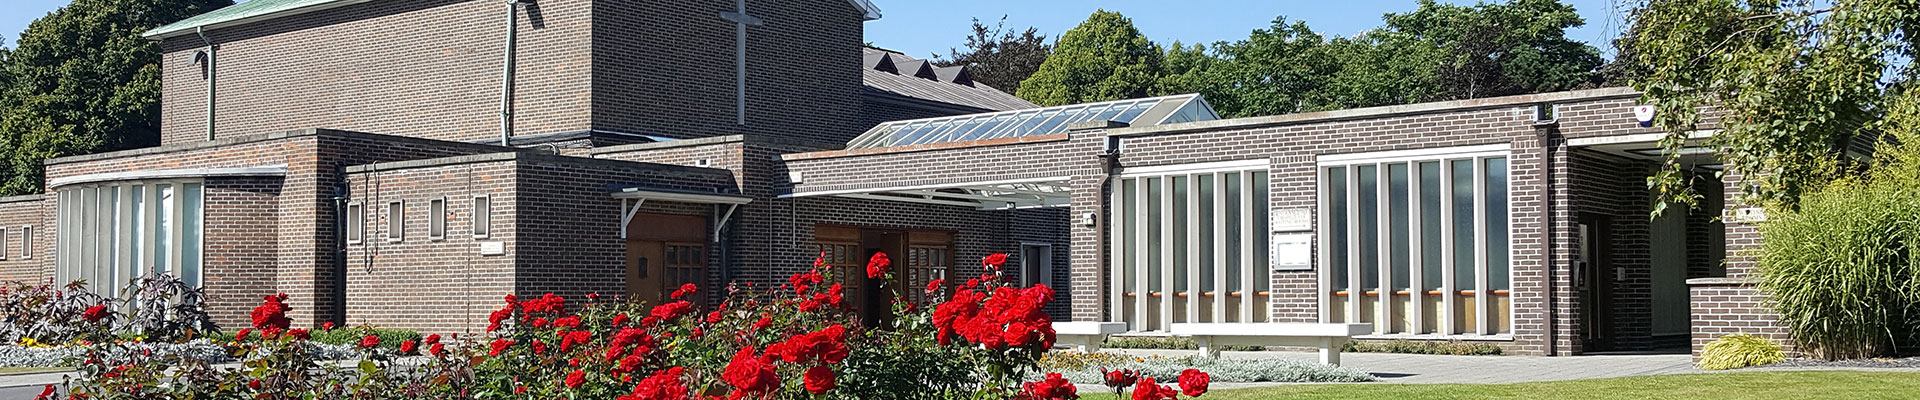 Photograph of the crematorium building with red roses in the foreground